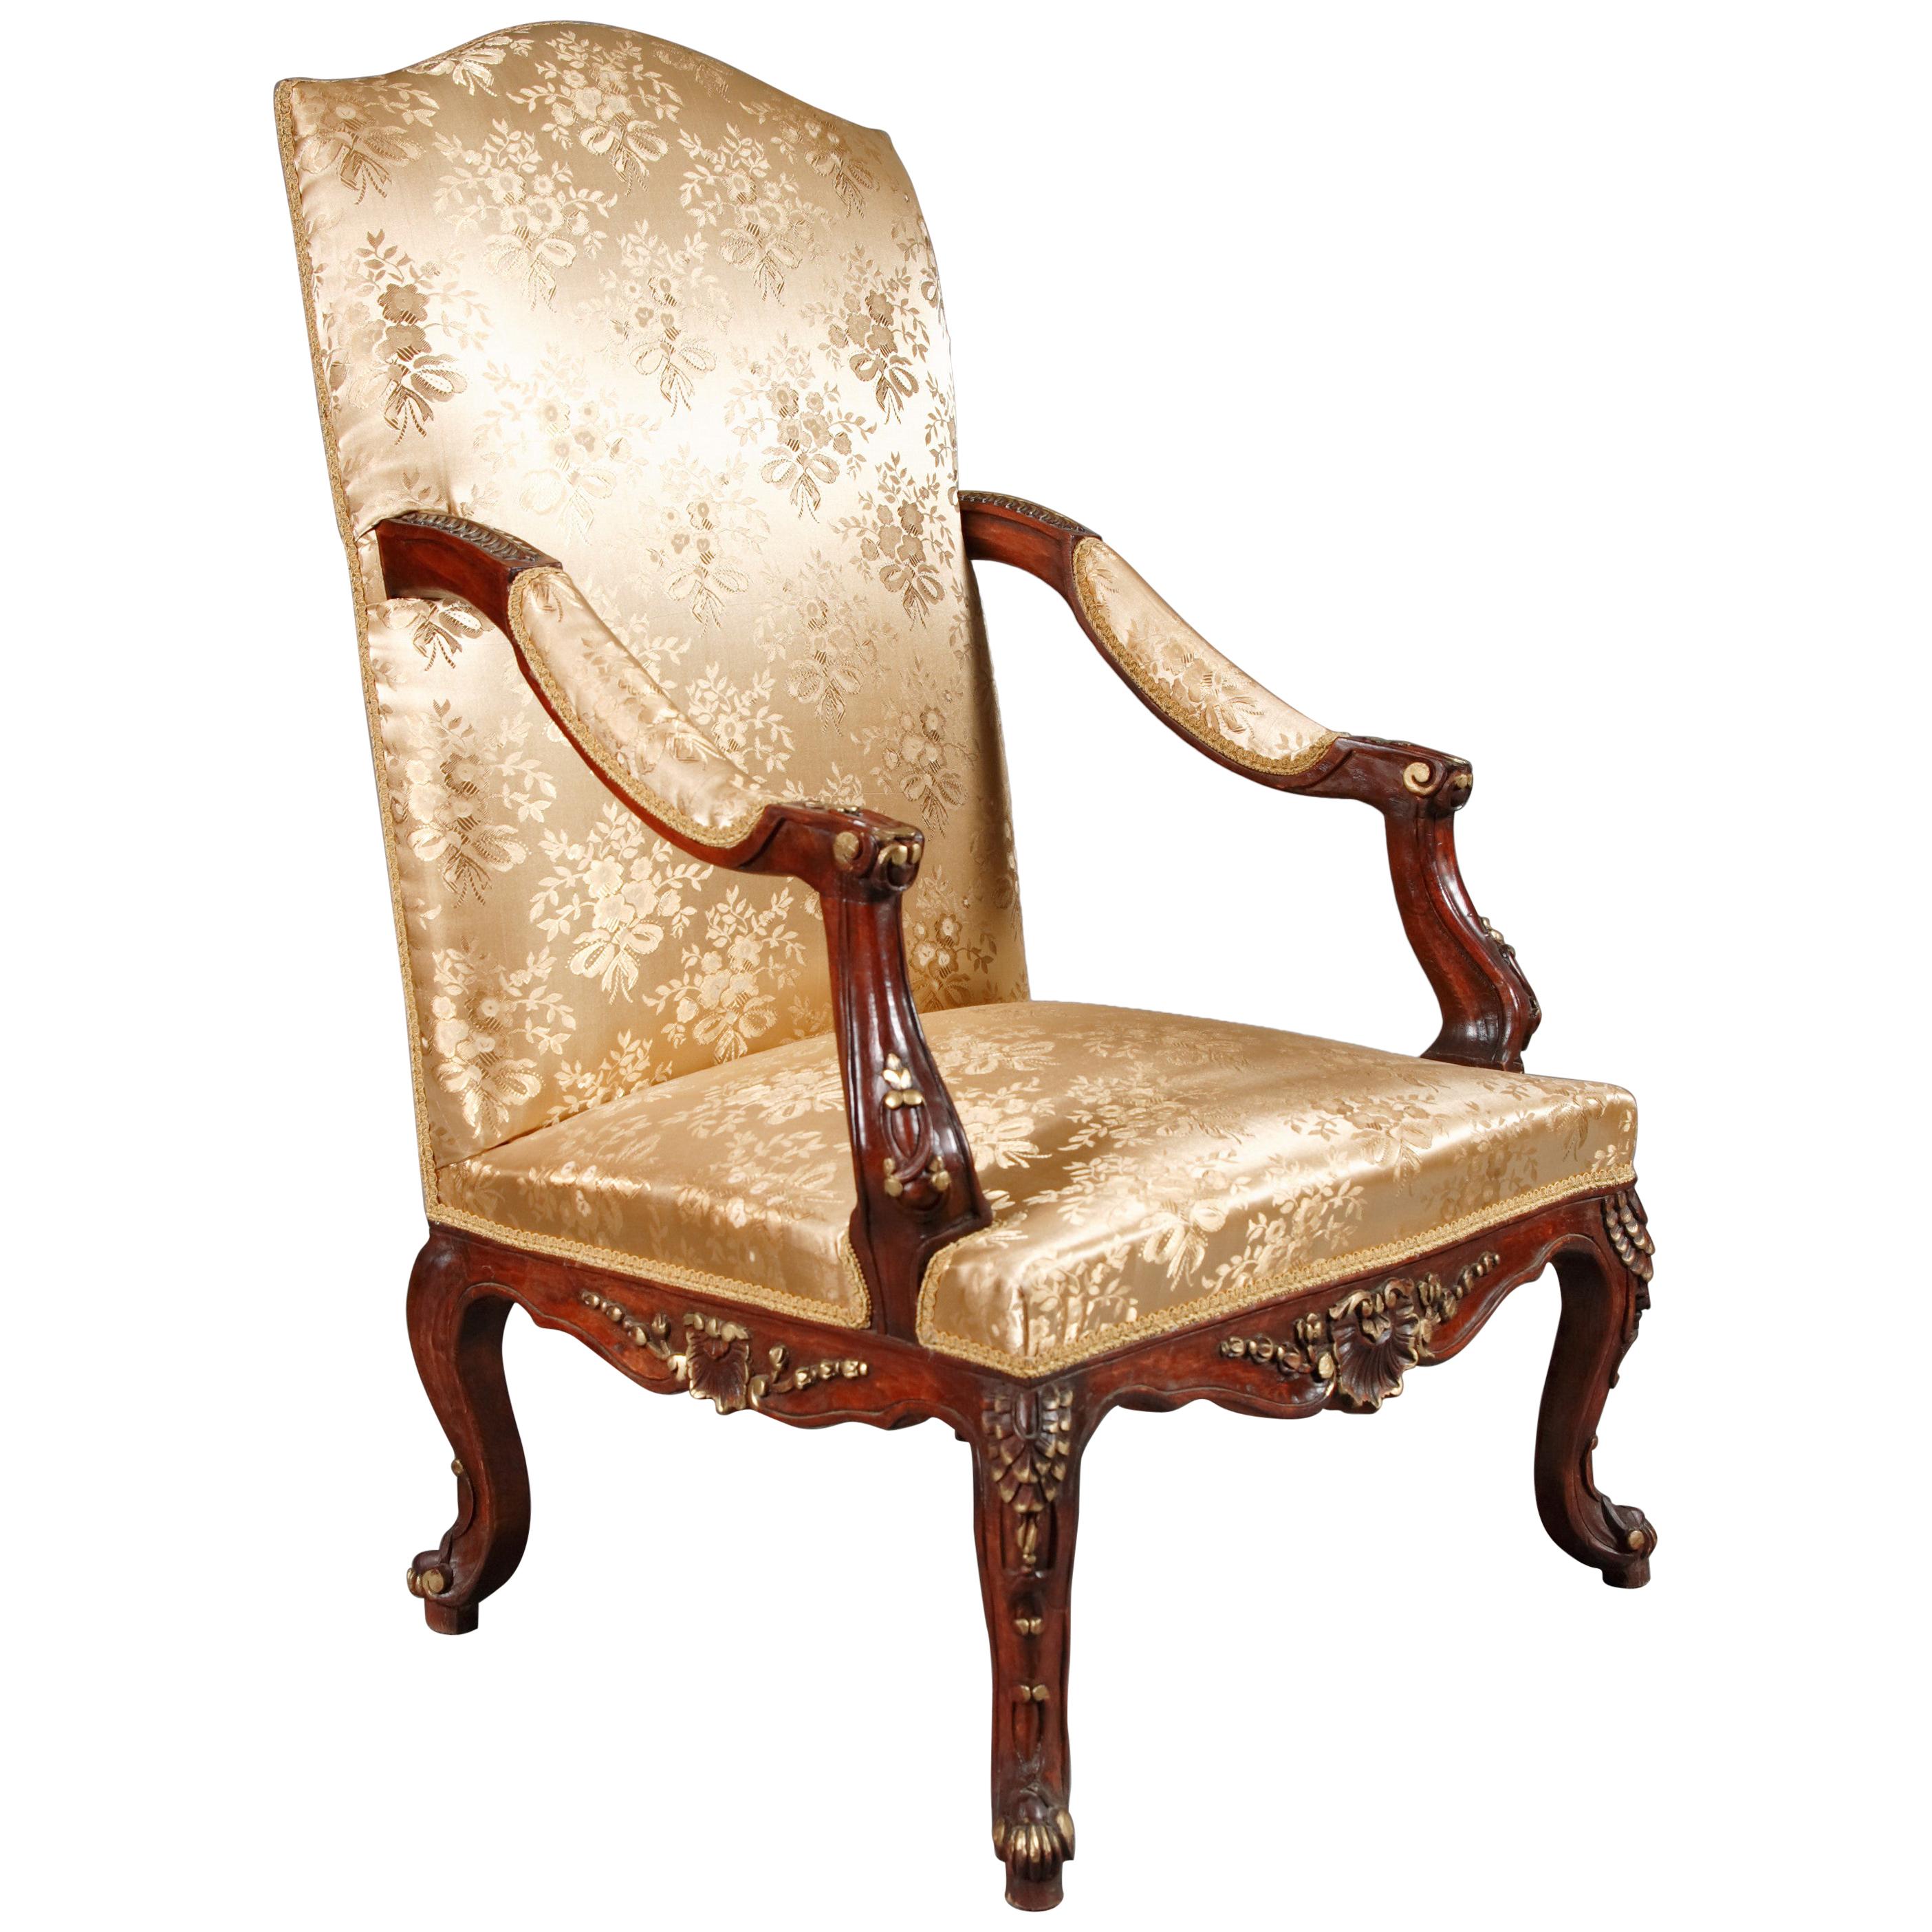 Classic Baroque Armchair in the antique Louis Quinze Style beech hand crafted